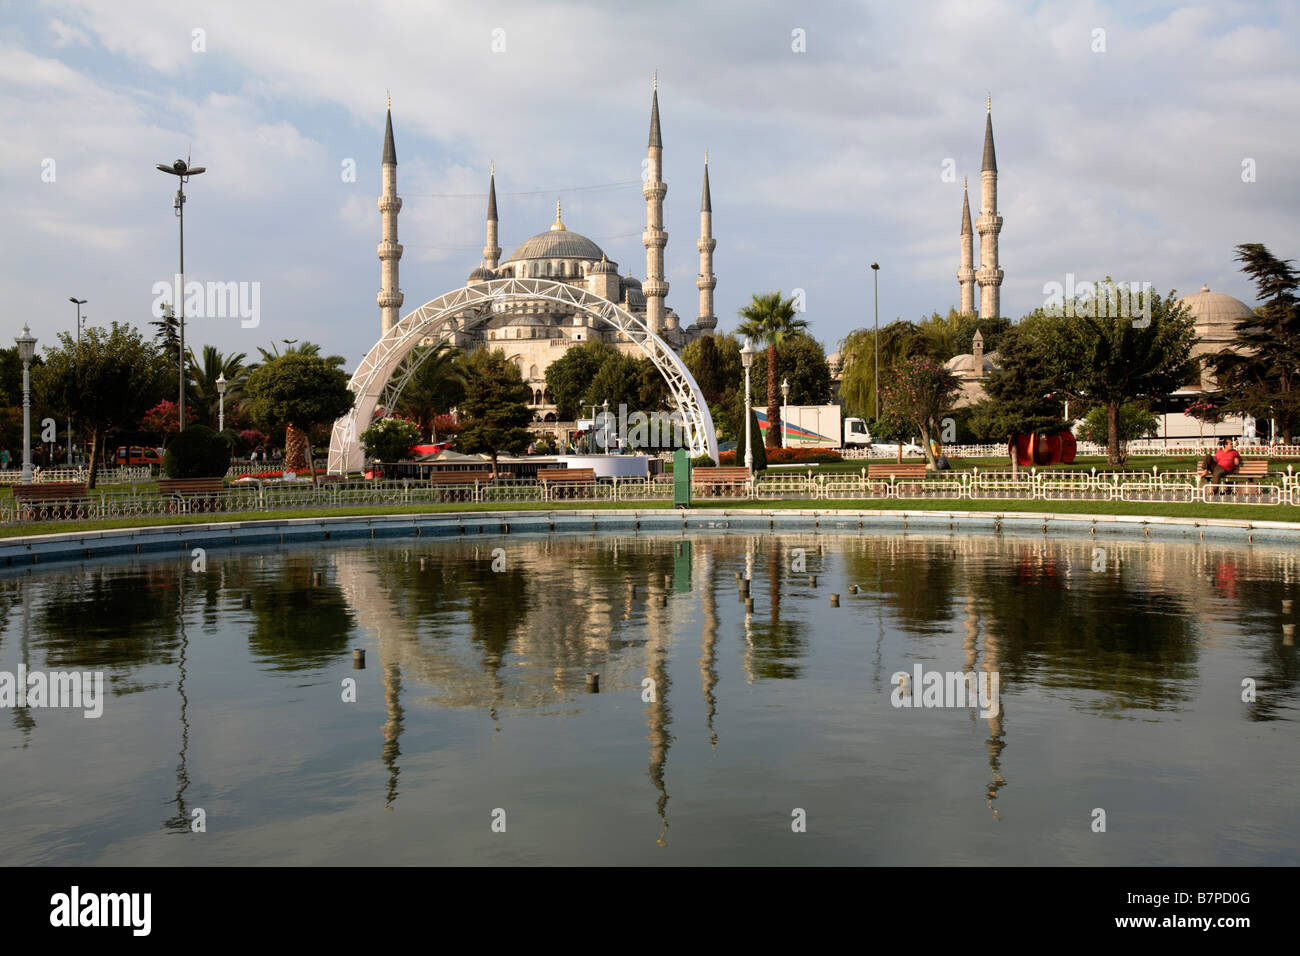 Sultan Ahmed Mosque, aka Blue mosque, in the wintertime, Istanbul, Turkey Stock Photo